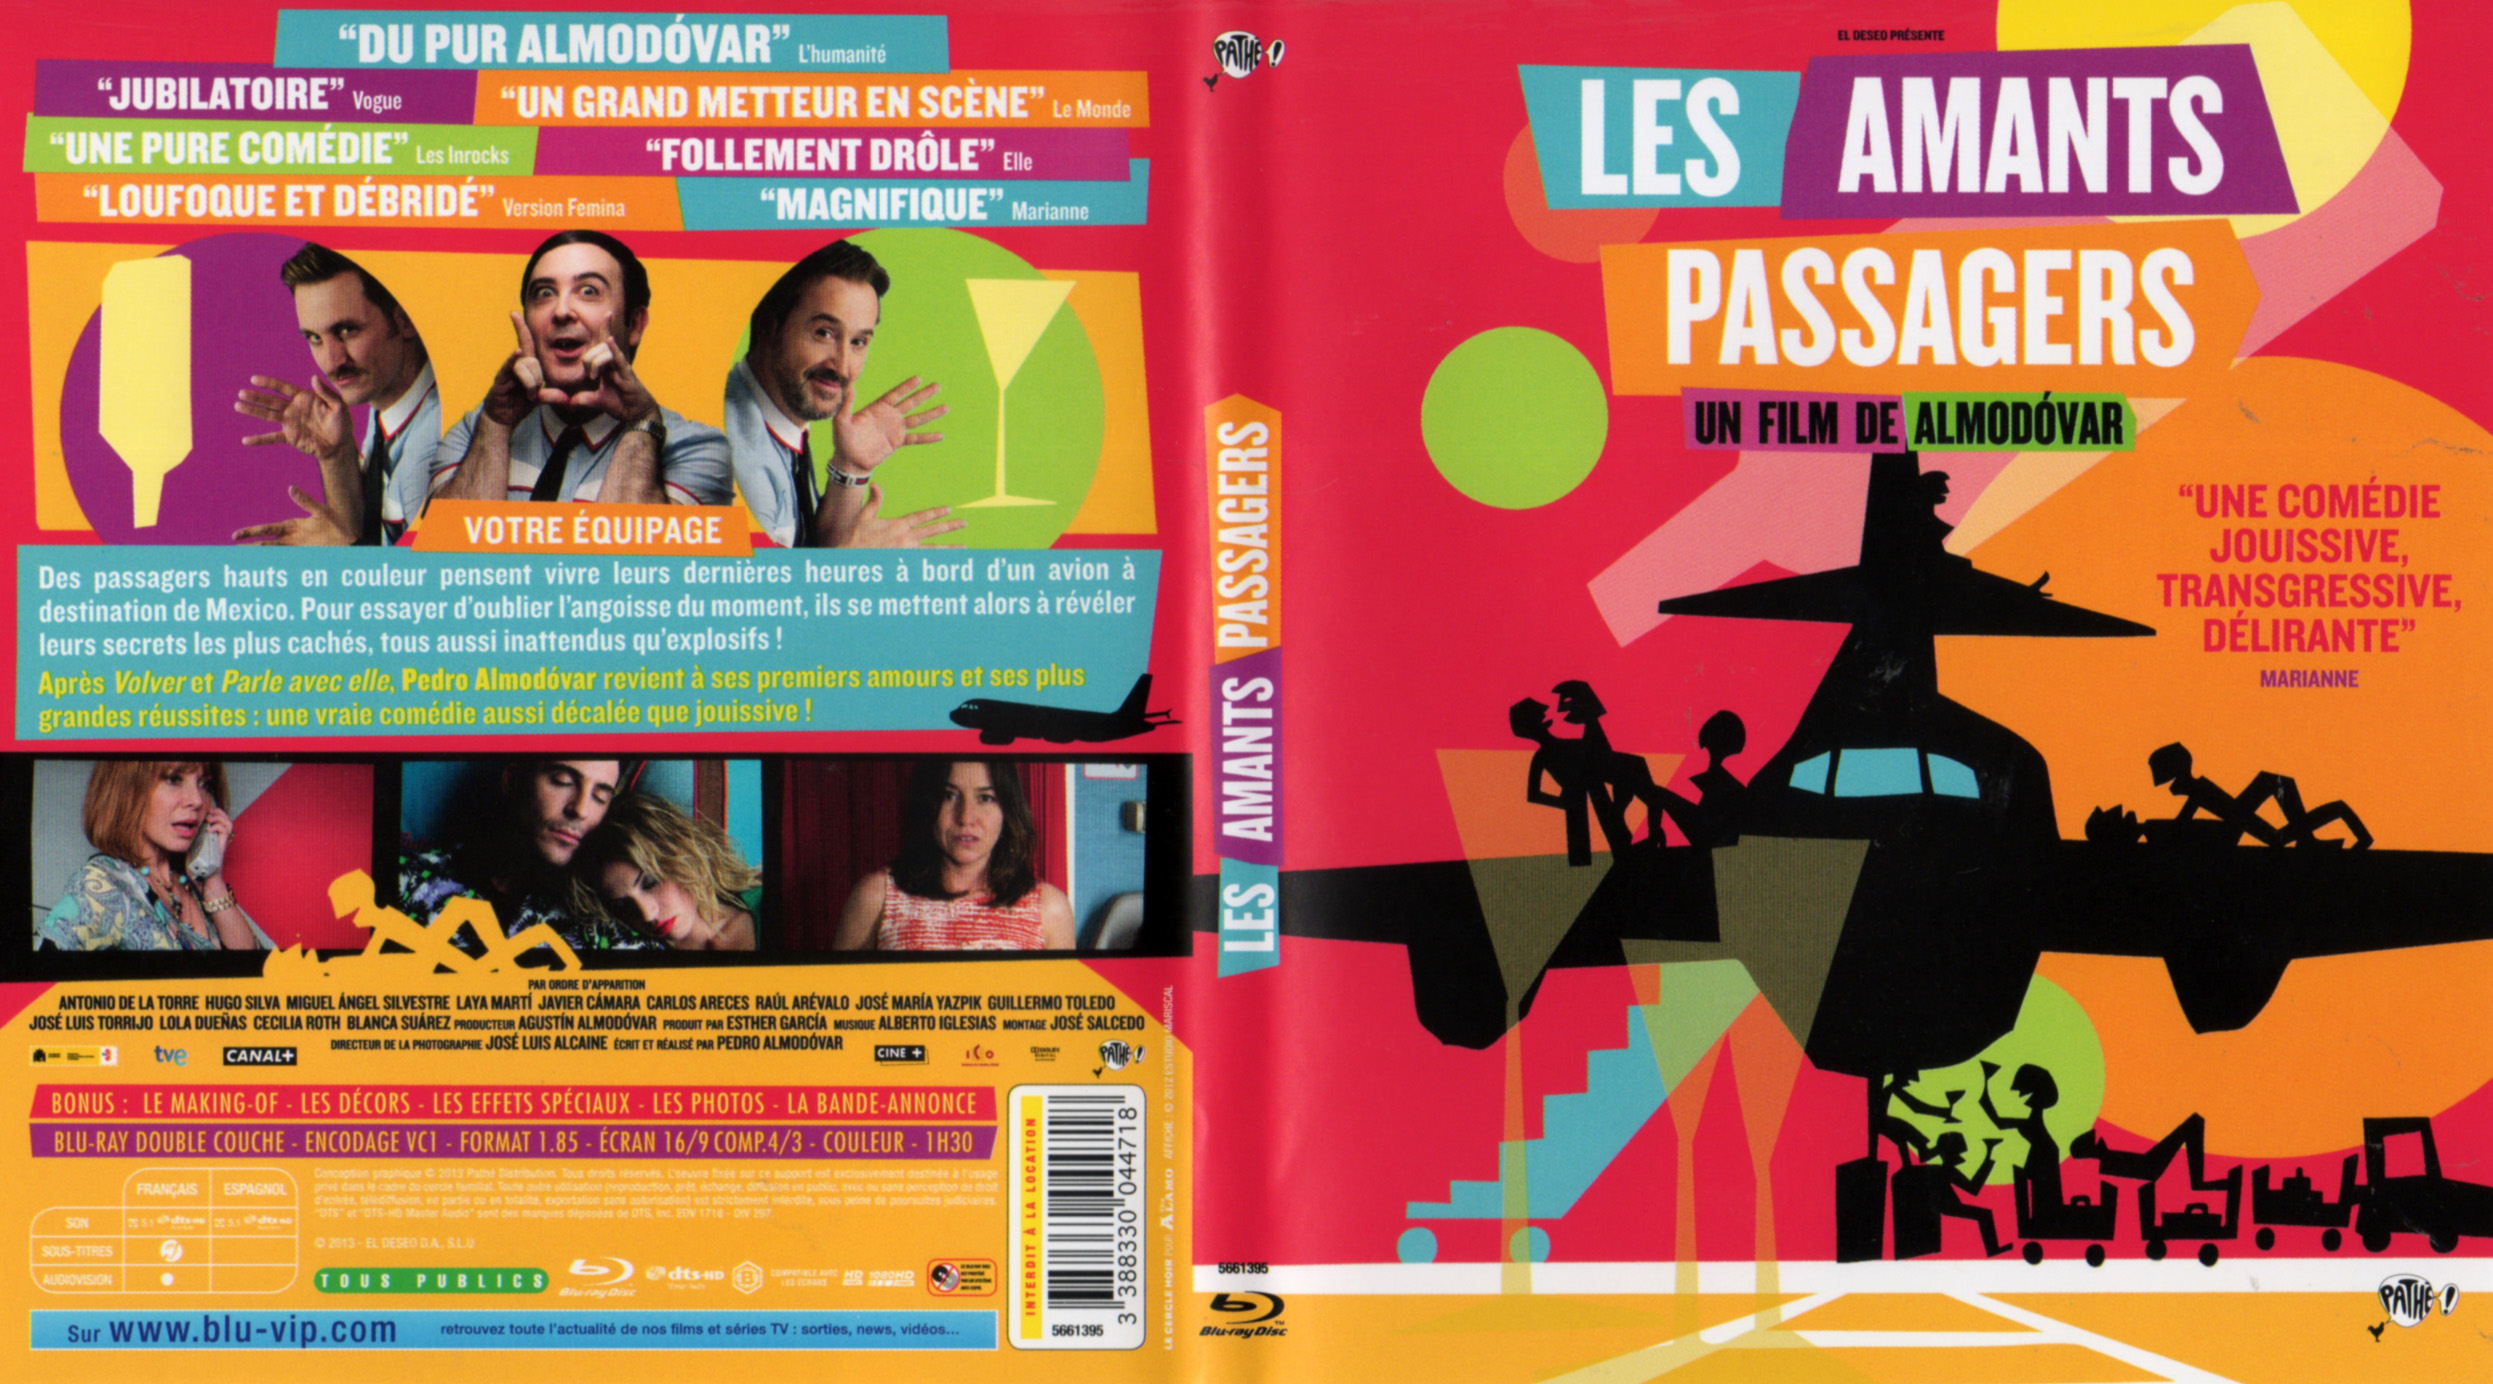 Jaquette DVD Les amants passagers (BLU-RAY)